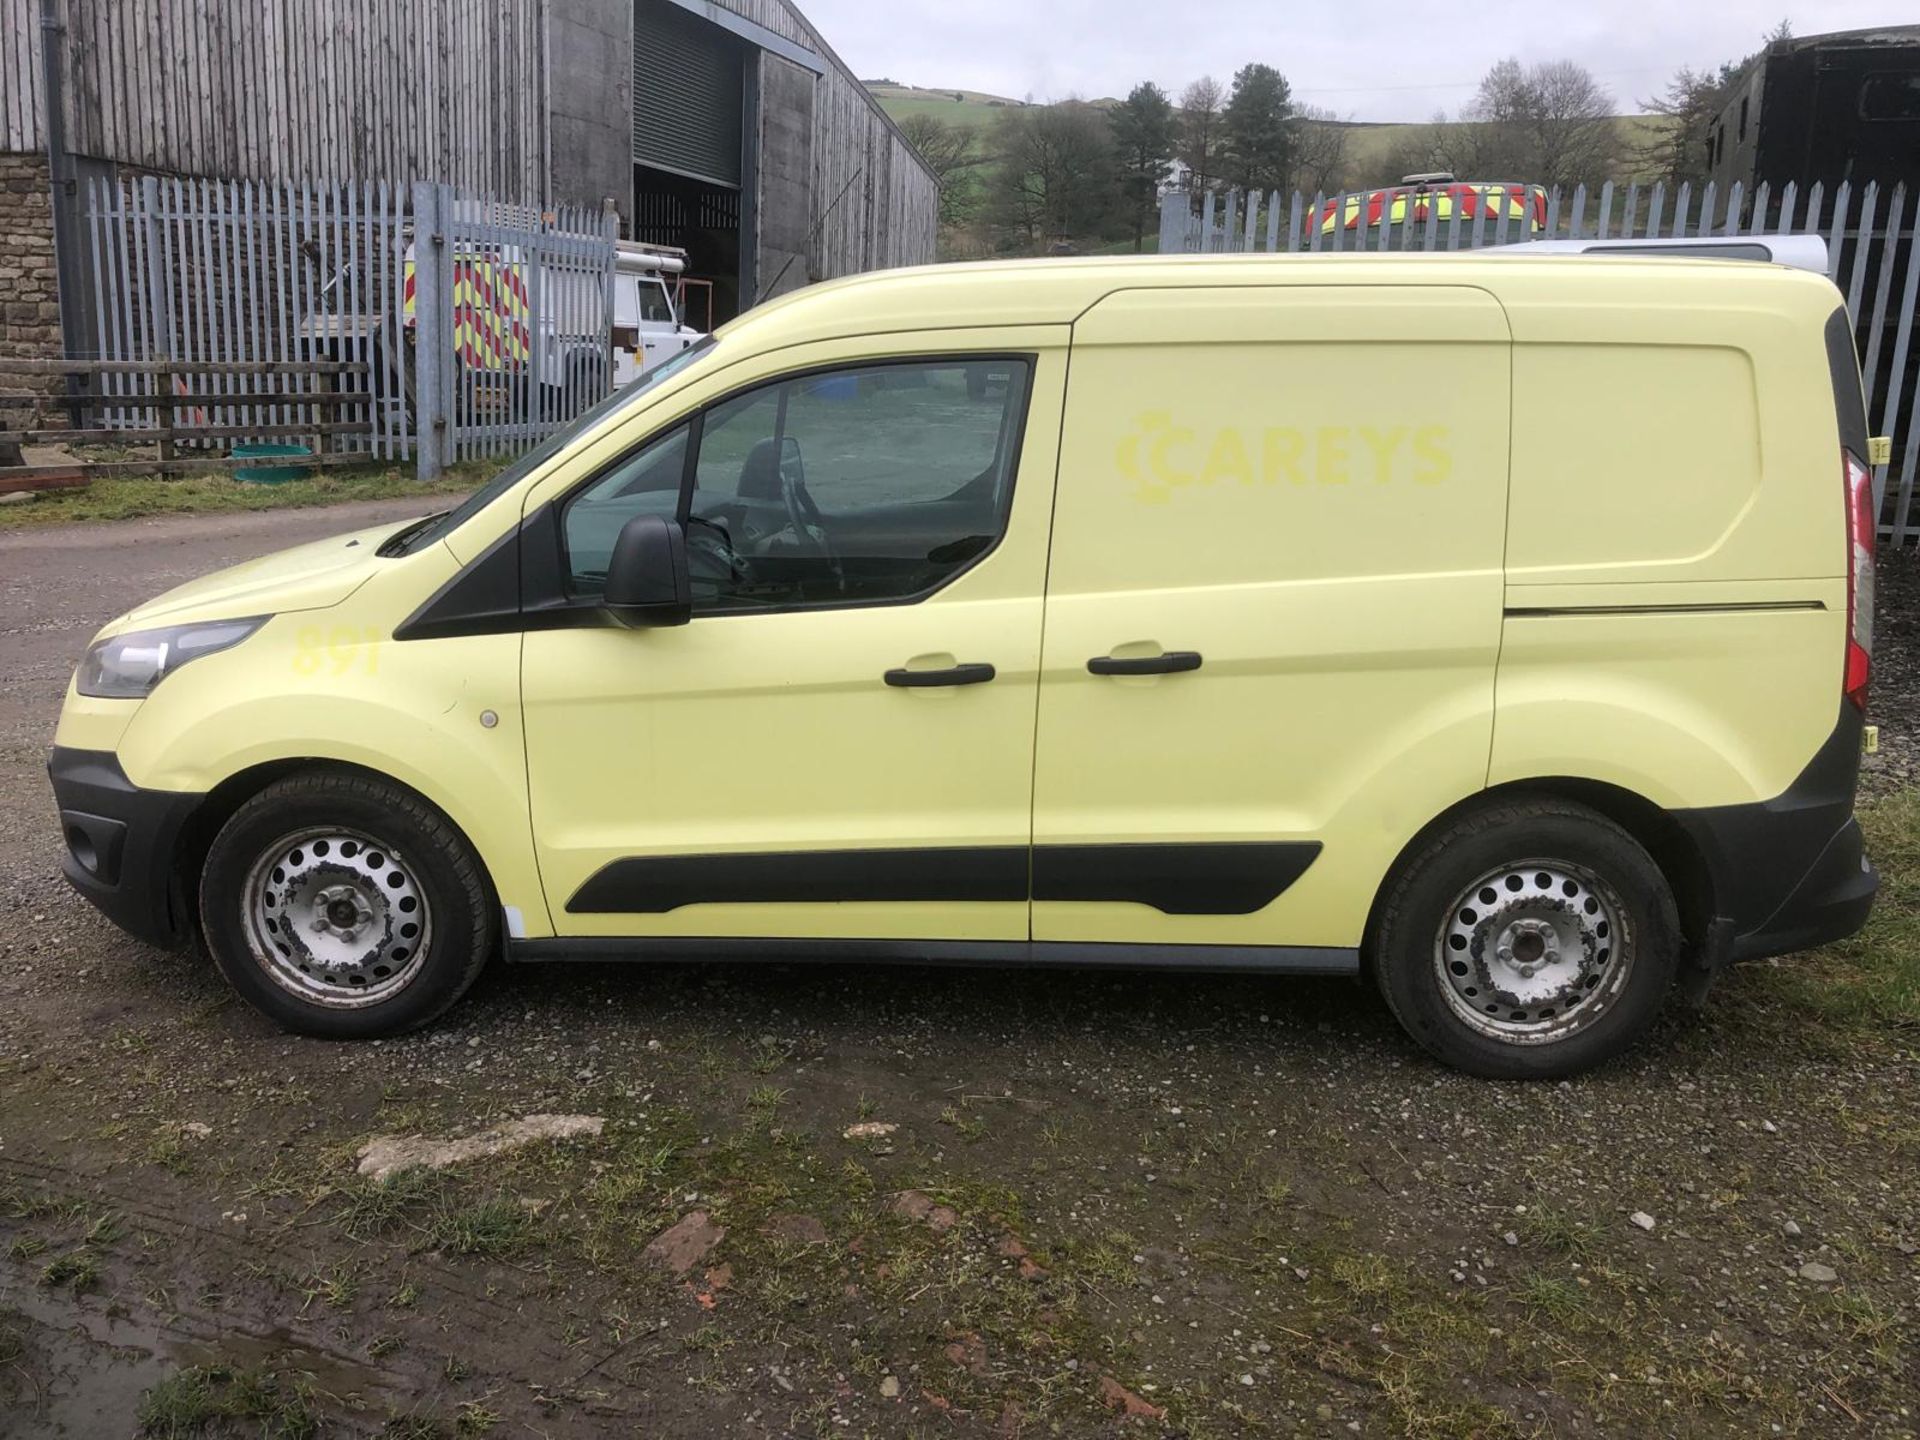 2015 FORD TRANSIT CONNECT 200 PANEL VAN - 1.6 TDCI - 91621 MILES - Image 4 of 15